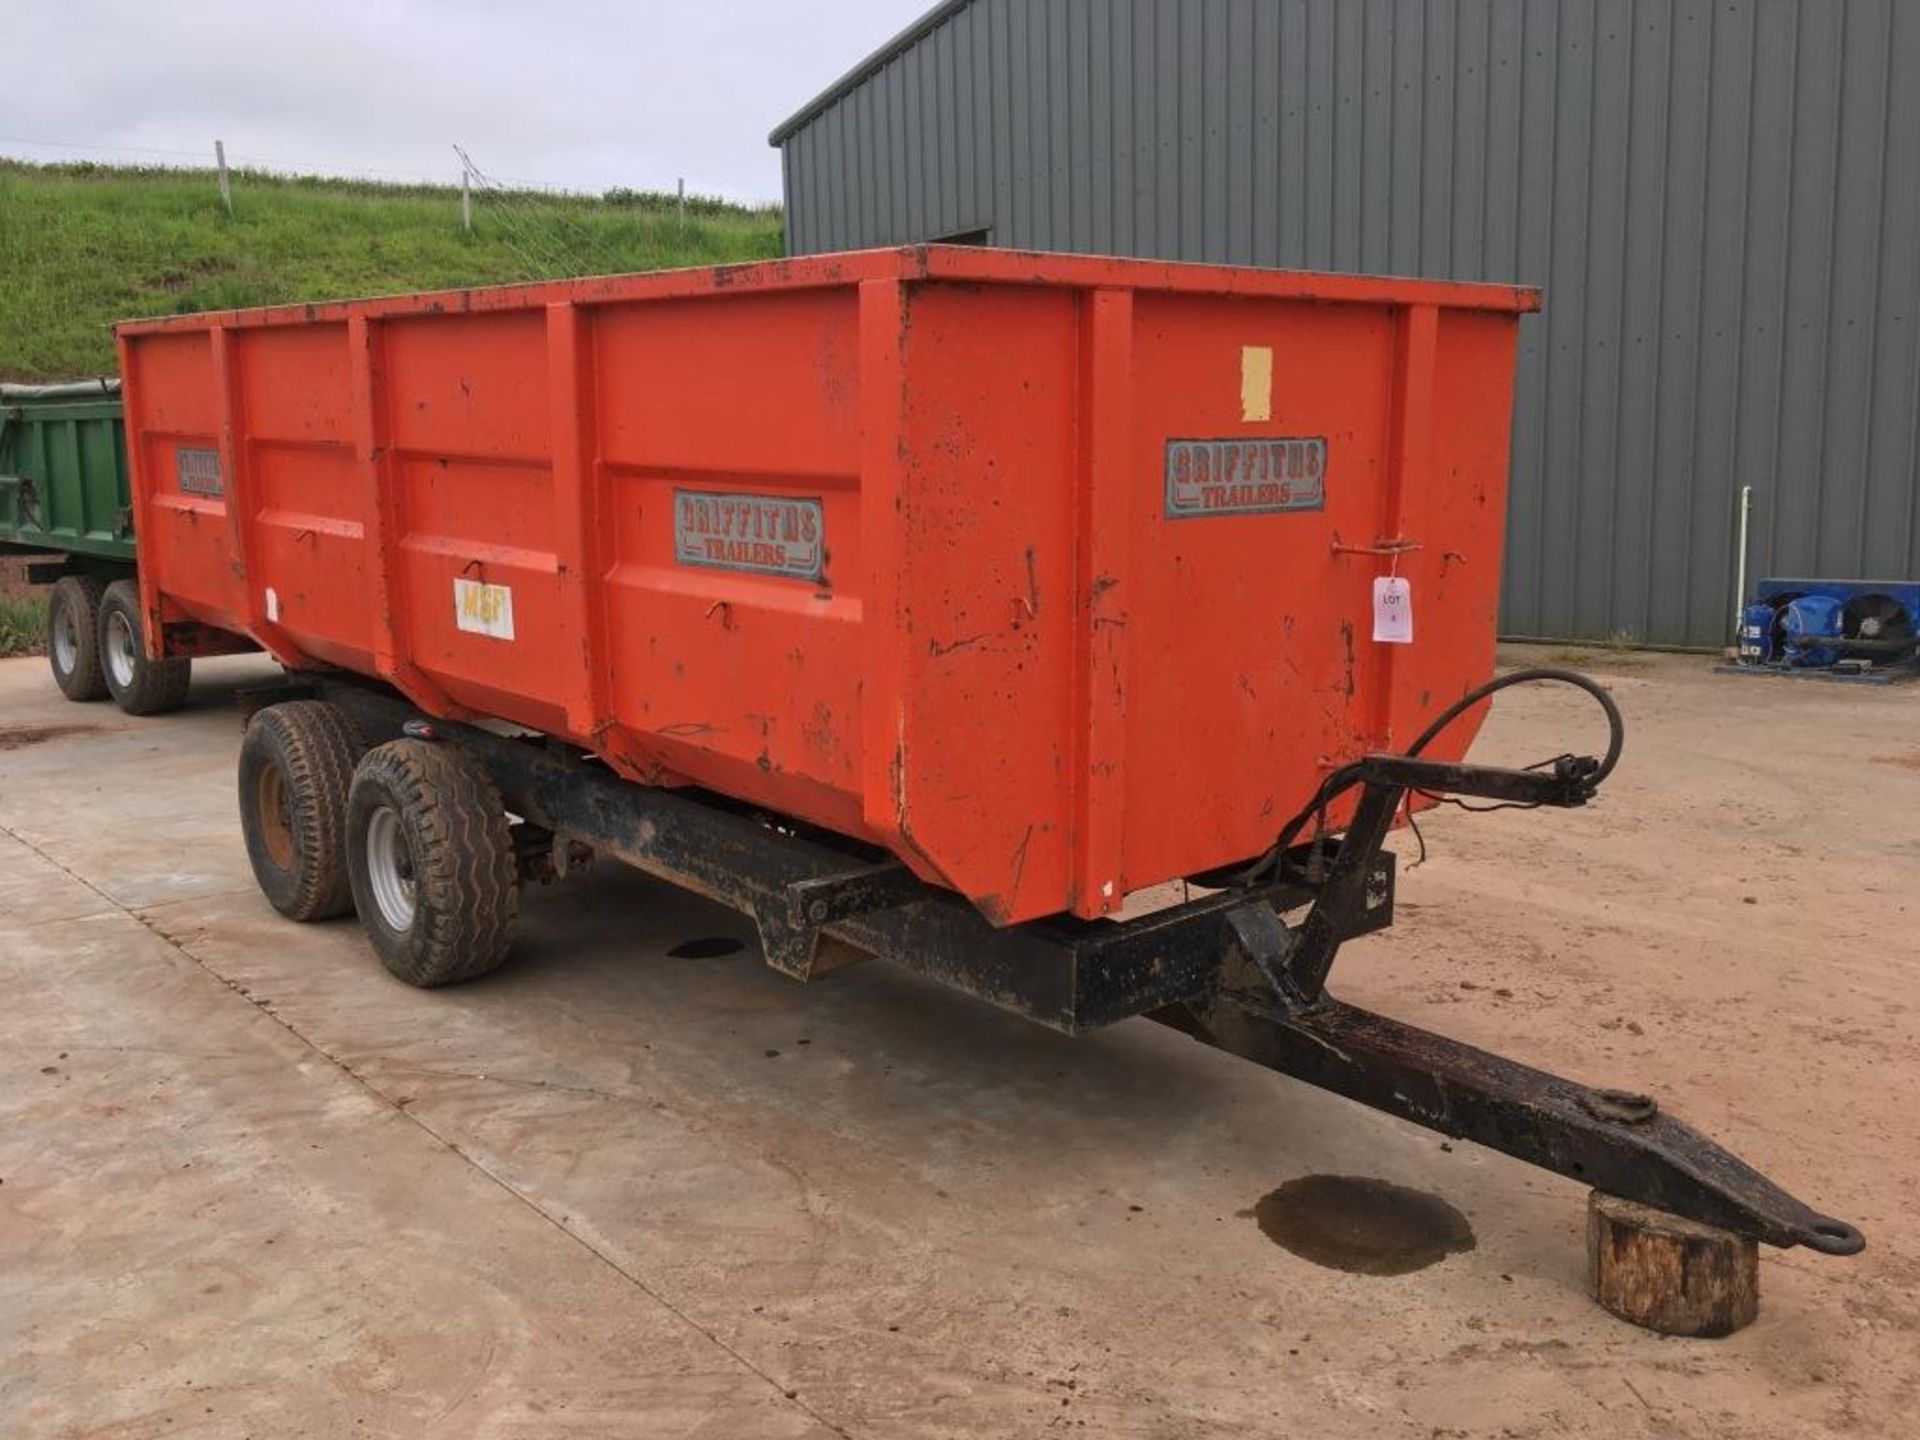 Griffiths 10 ton twin axle tipping trailer, serial number: 6674 (1990) - Bild 2 aus 10